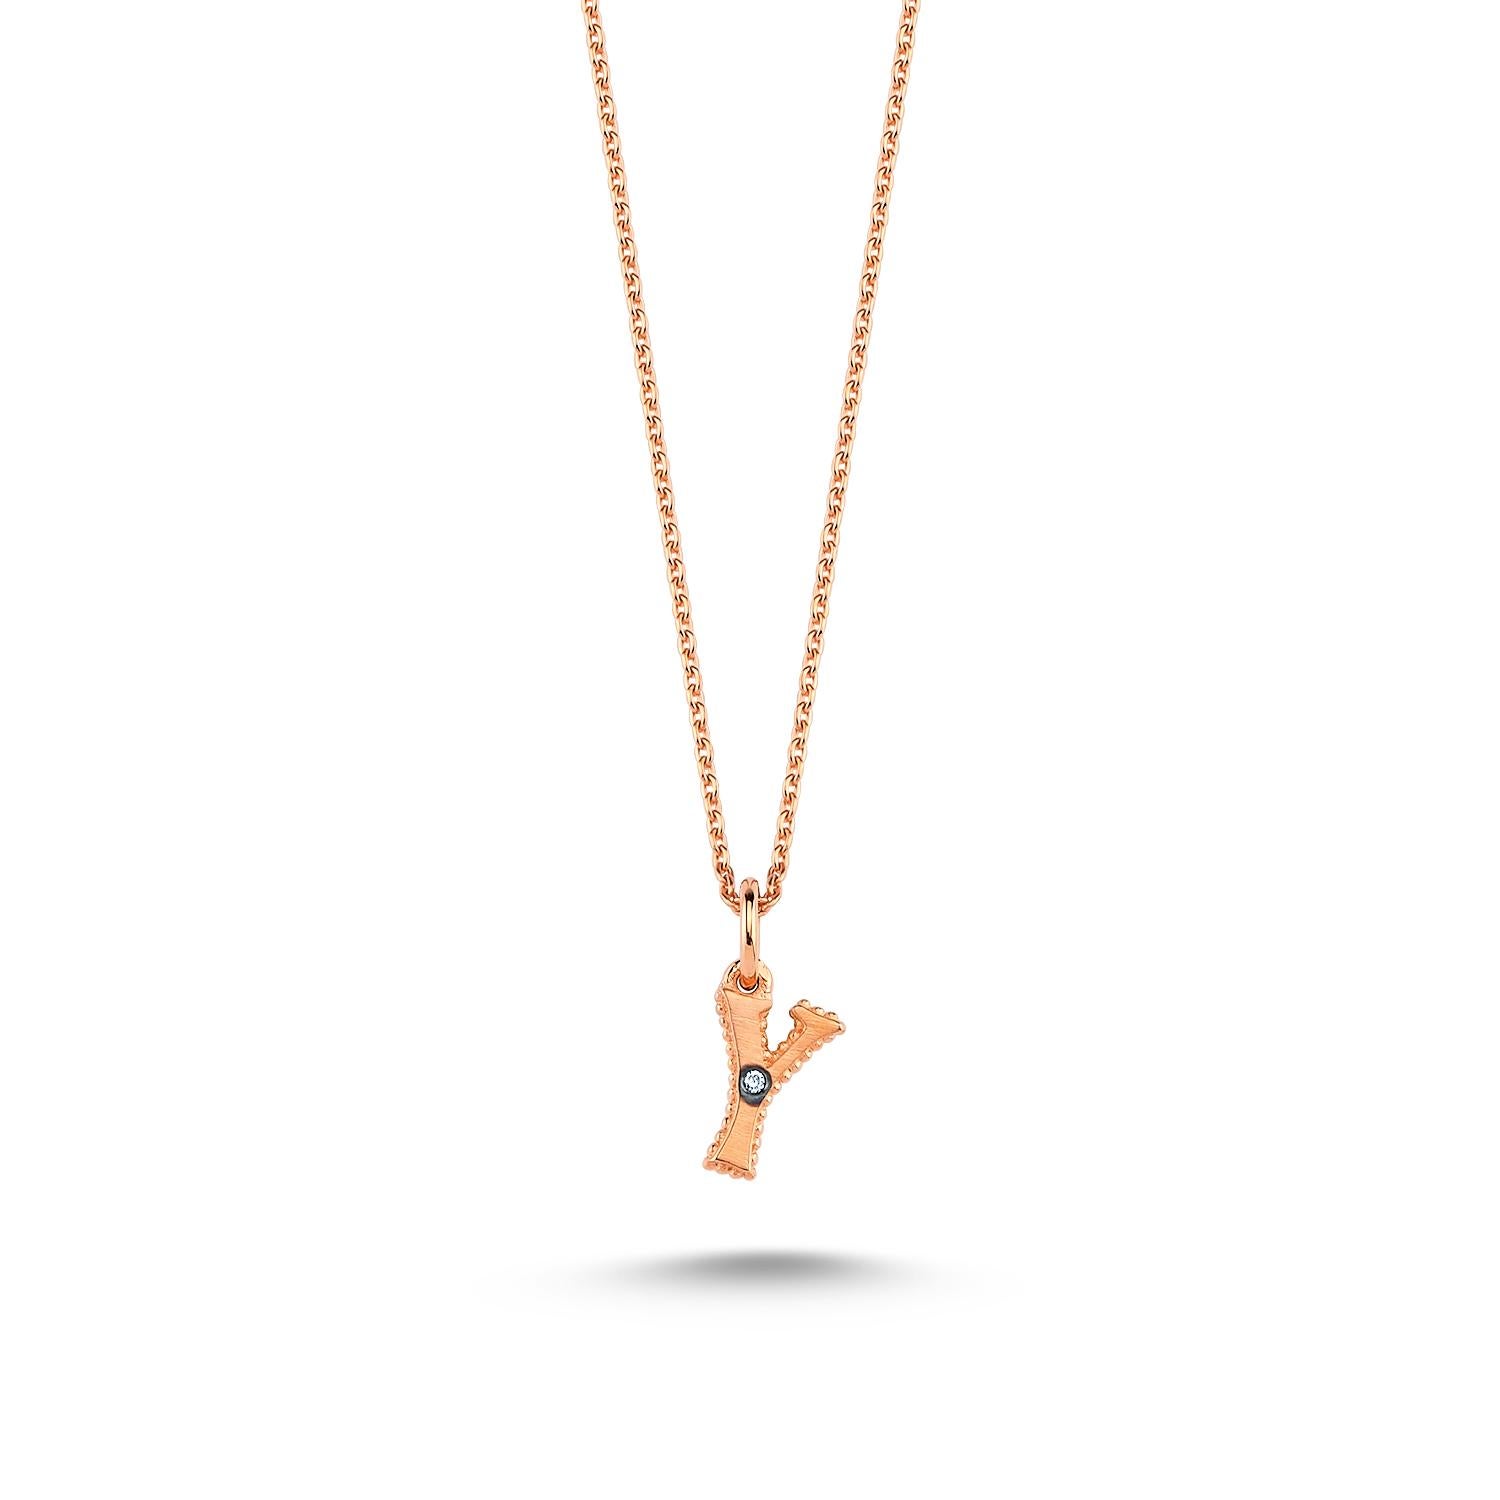 Y 14k rose gold small necklace with white diamond by Selda Jewellery

Additional Information:-
Collection: Letter Collection
14k Rose gold
0.01ct White diamond
Pendant height 0.7cm
Chain length 44cm